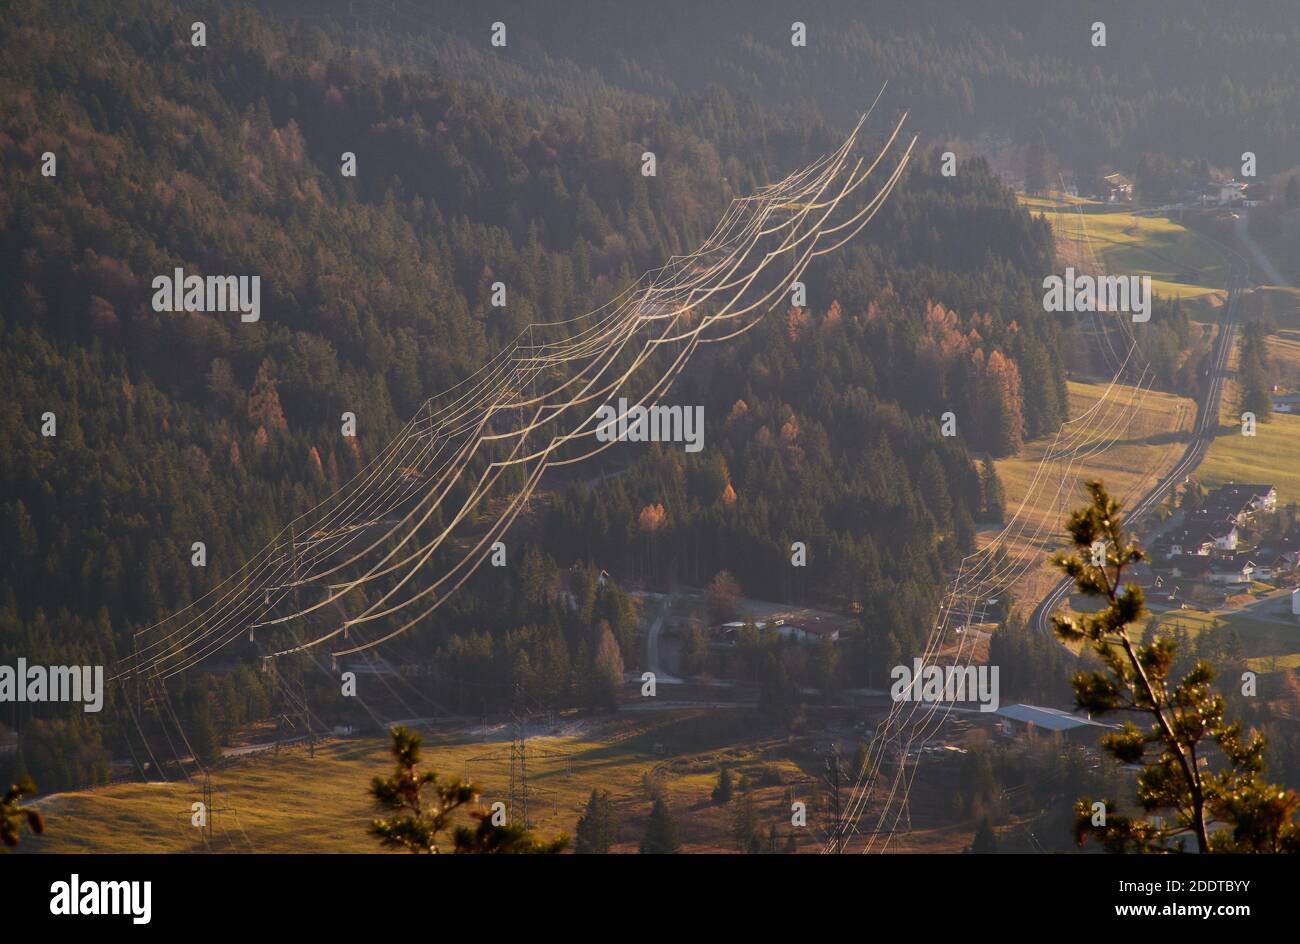 Reutte, Tyrol, Austria, November 26, 2020.  Electricity power lines of the Reutte power supply with electricity pylons with surrounding landscape of the Lechtal valley and the Alps. © Peter Schatz / Alamy Live News Stock Photo